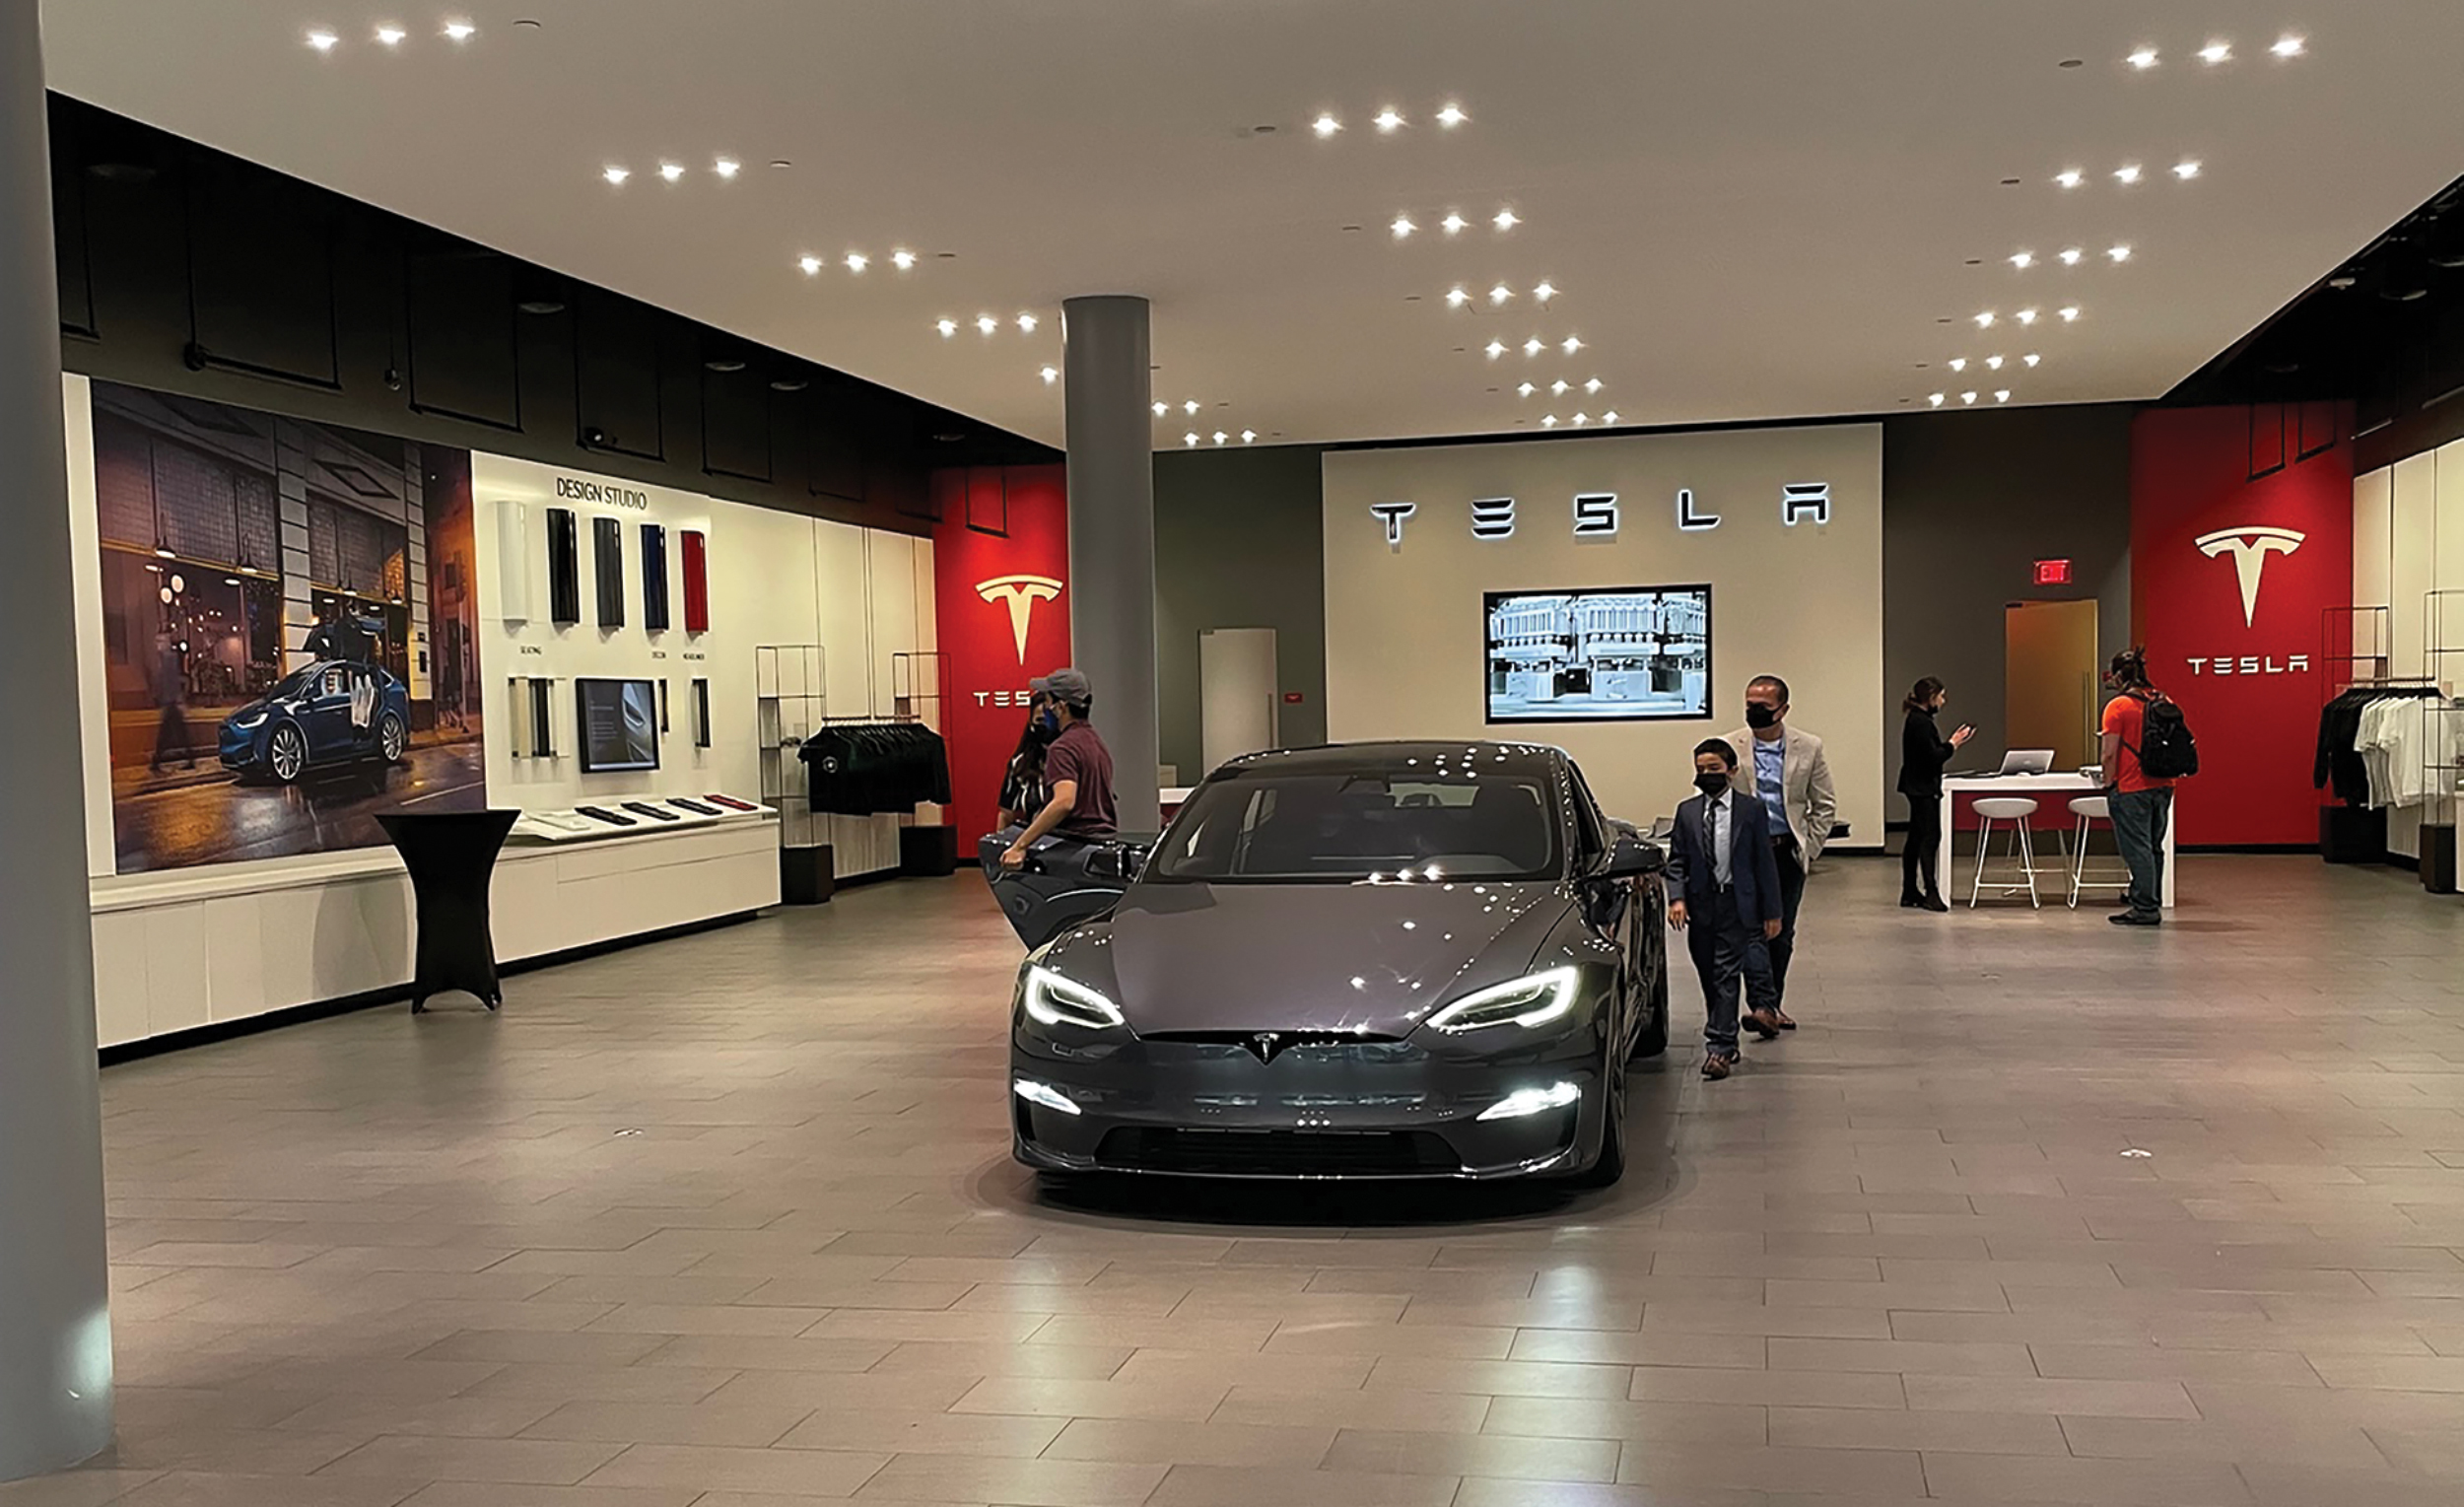 Tesla’s Santana Row showroom includes strong messaging and an on-brand color scheme.